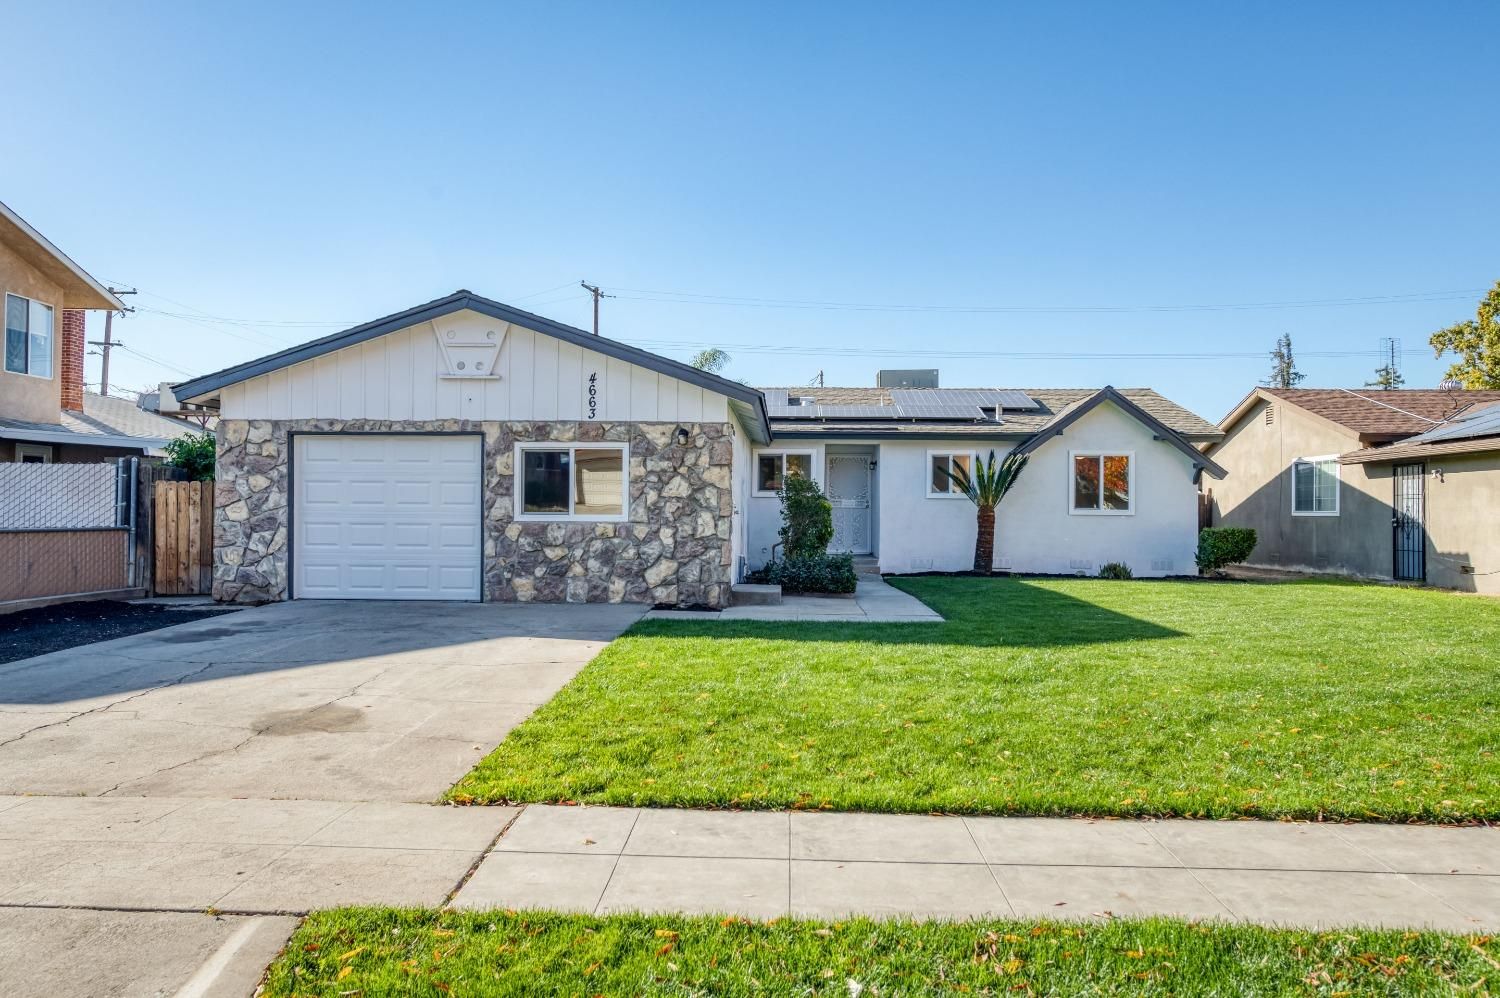 Main Photo: 4663 North Mariposa  Street in Fresno: Residential for sale : MLS®# 605067